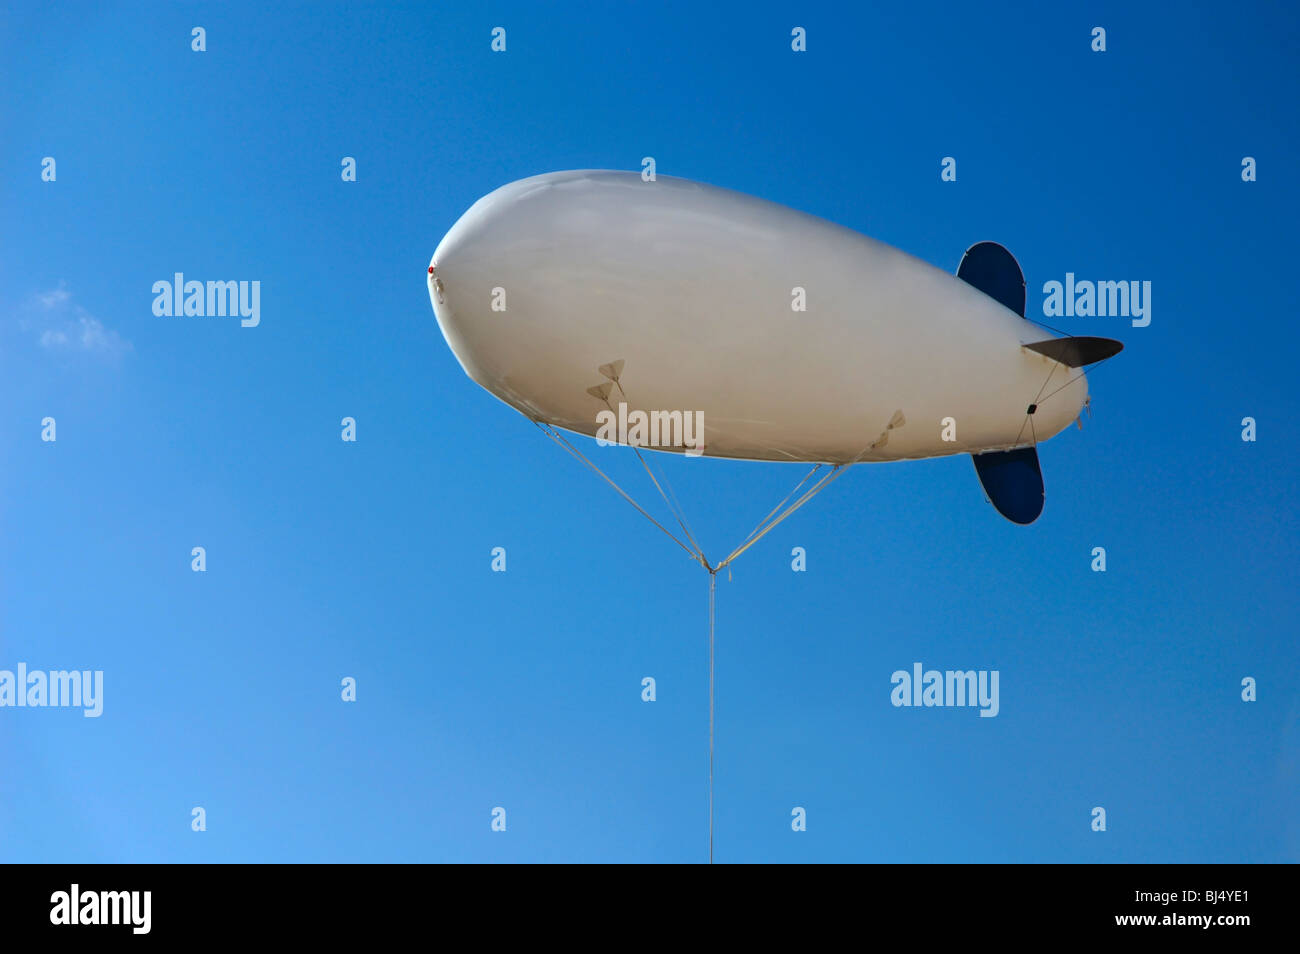 White inflatable airship hovering in blue clear sky Stock Photo